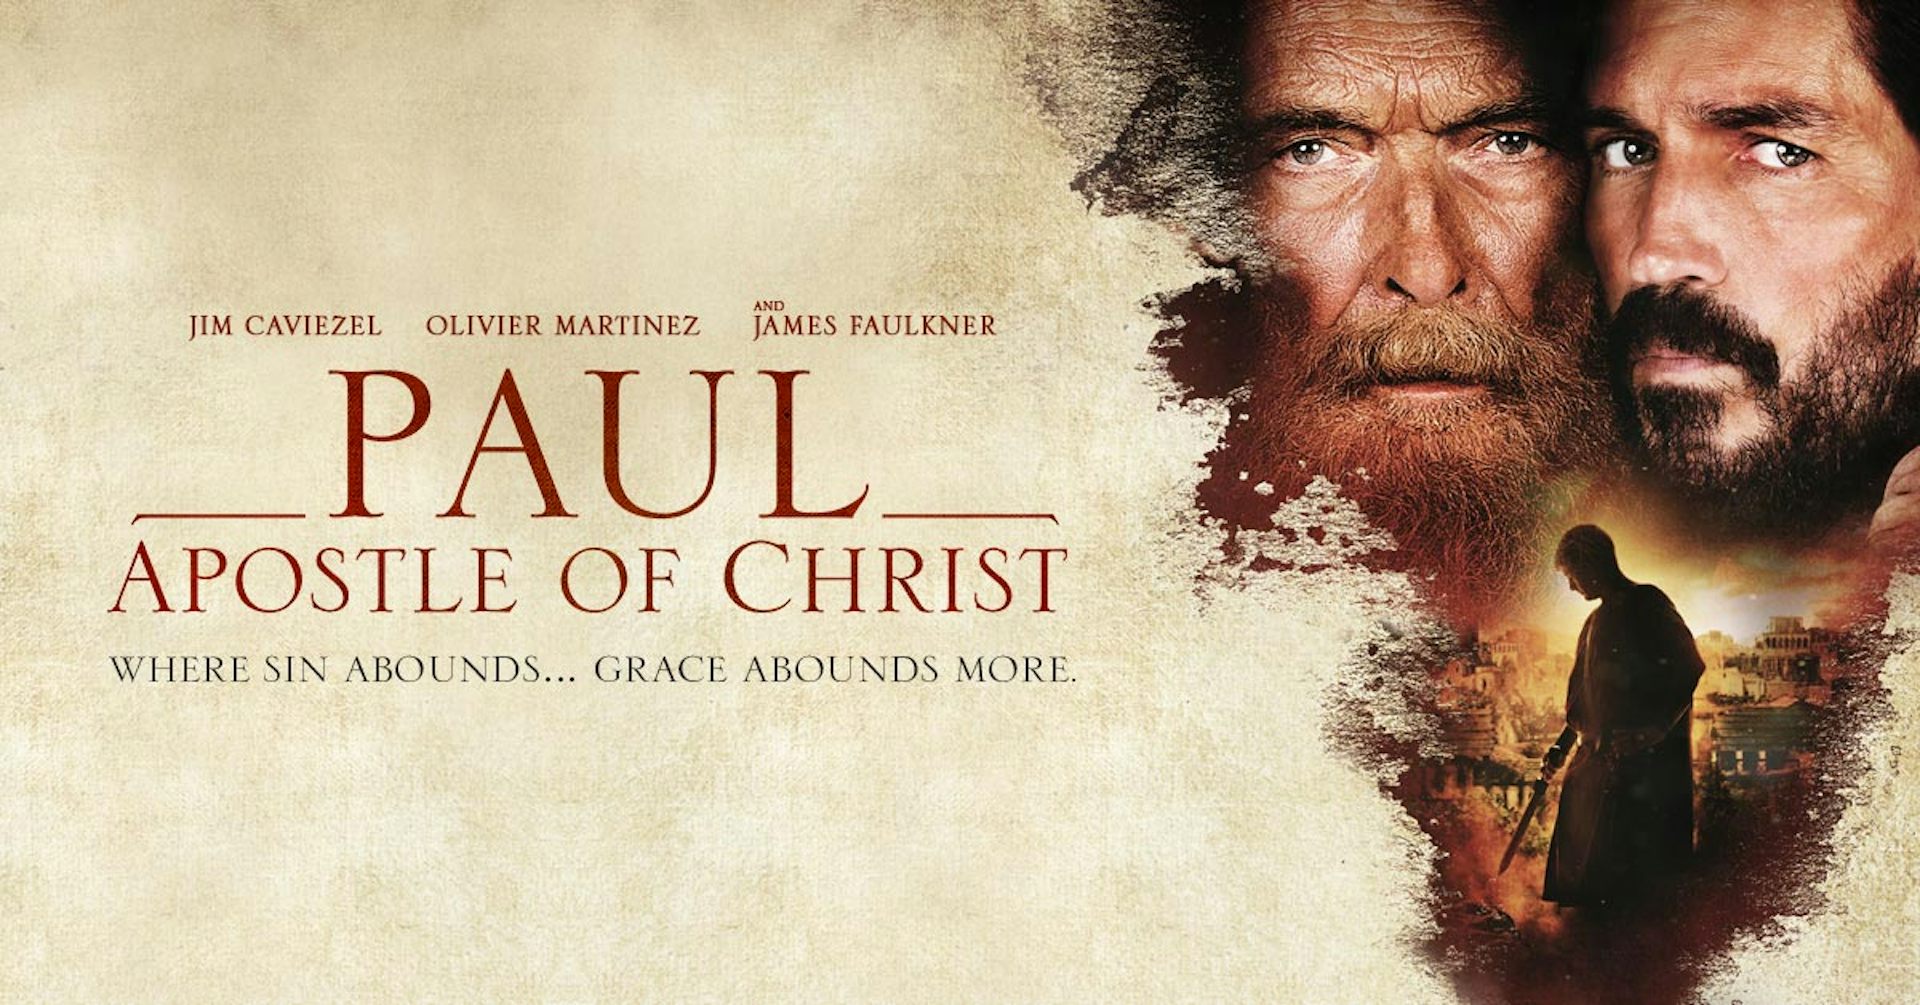 the passion of christ movie 2010 cast of characters